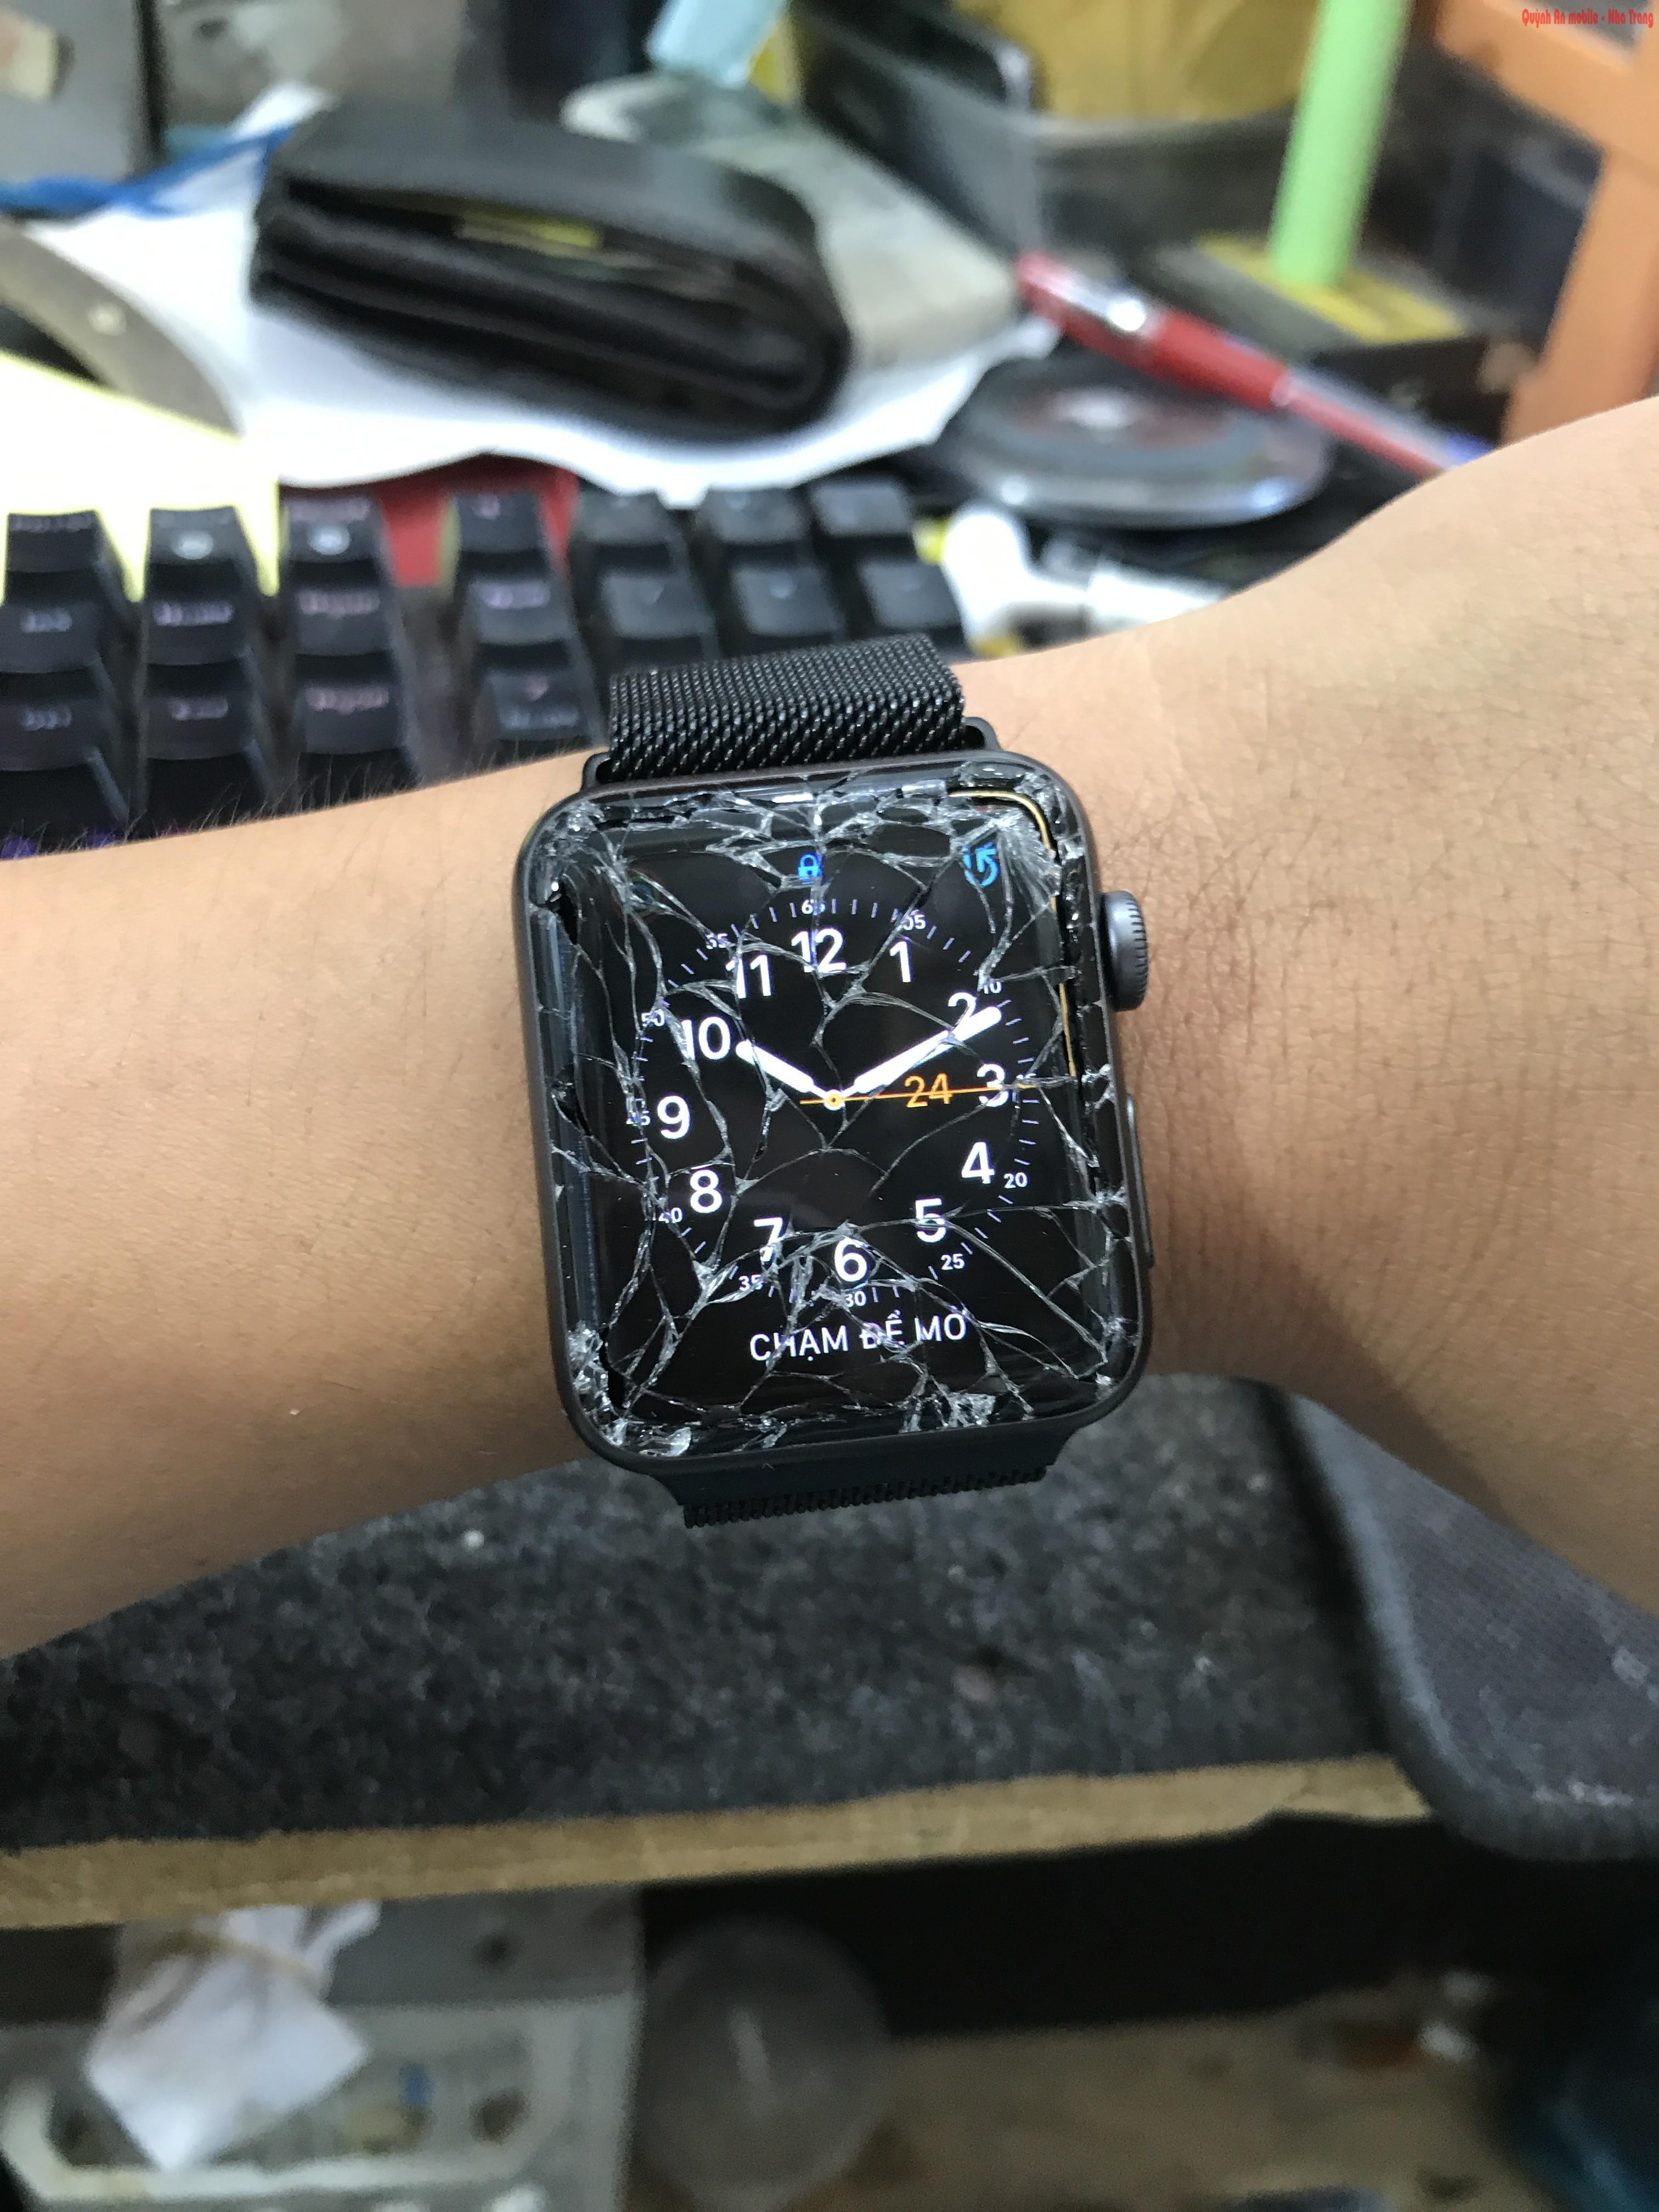 Replace and replace apple watch seri 2/3 screen in Nha Trang call 0907623999 Thay mặt kính cảm ứng apple watch seri 2/3 tại Nha Trang liên hệ 0907623999 Quỳnh An Mobile